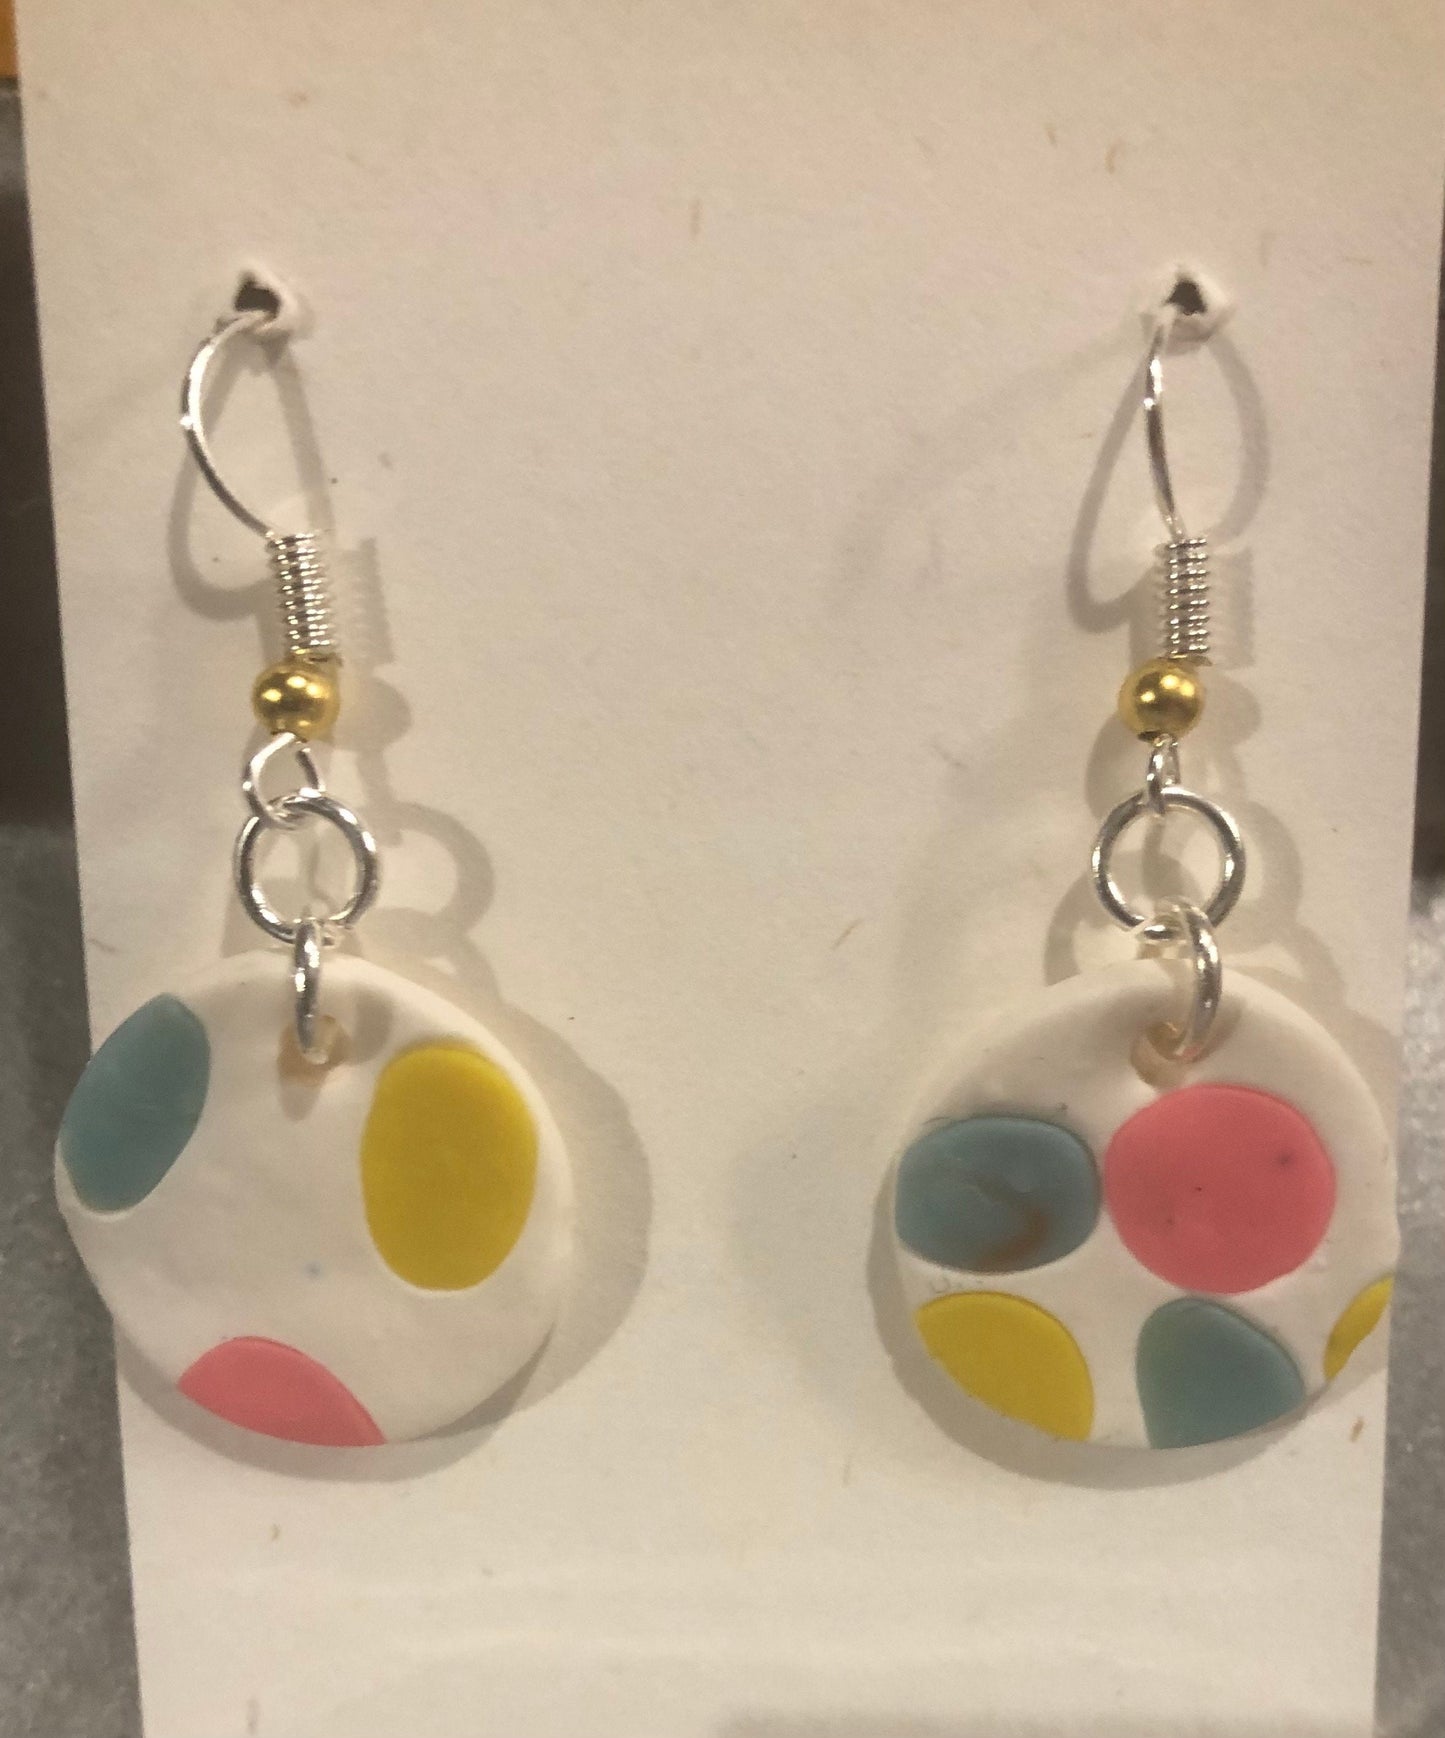 Handcrafted Stained Glass Clay Earrings - Unique Geometric Designs, Lightweight and Hypoallergenic Artisan Jewelry for Women